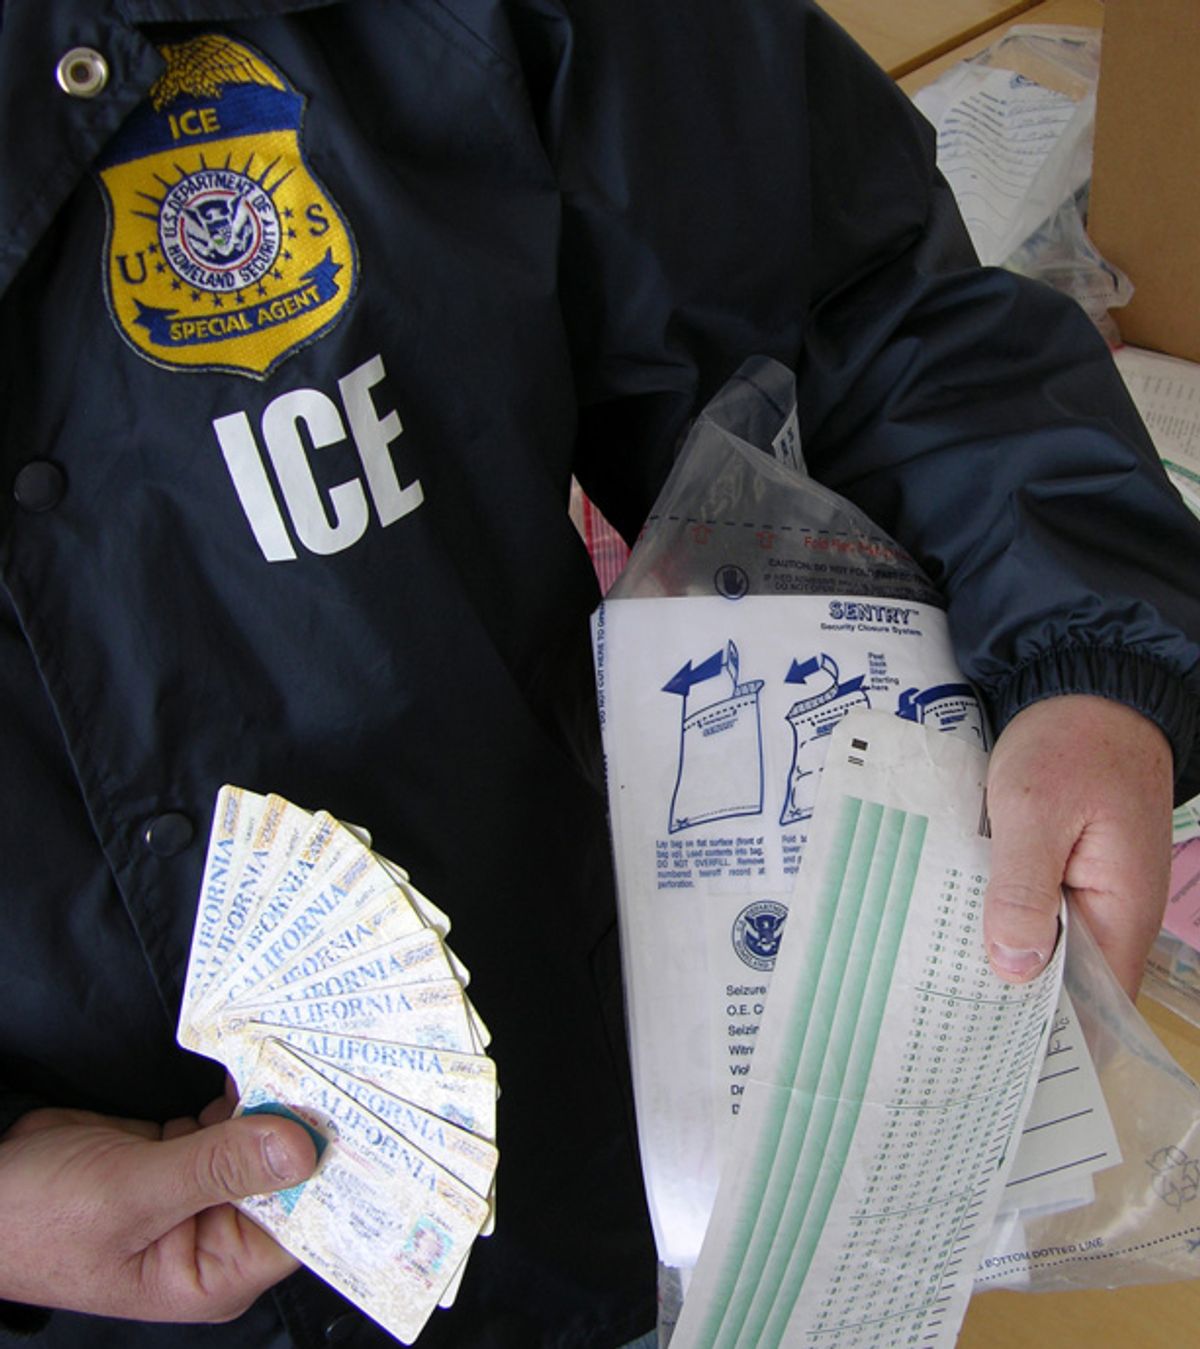 An Immigration and Customs Enforcement agent examines evidence in an immigration fraud case. (Associated Press)